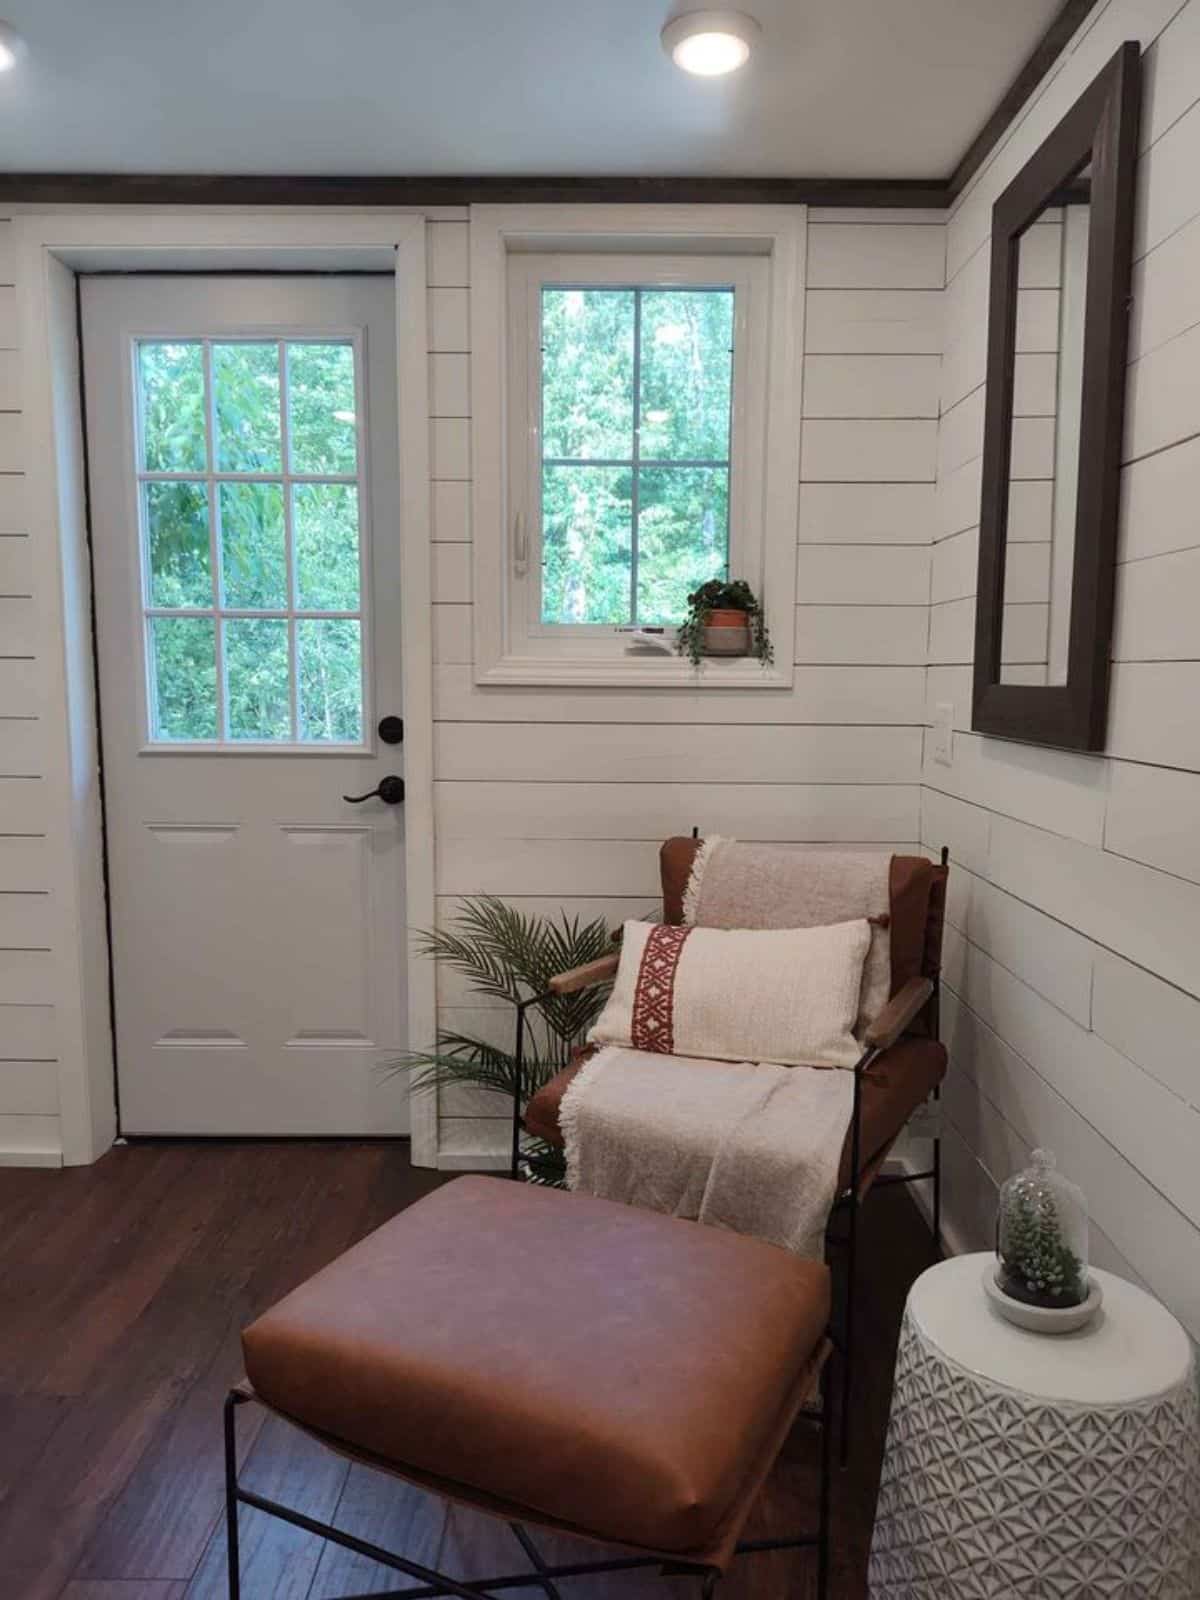 Living area of 38’ Tiny House has a chair, a futon and a side table